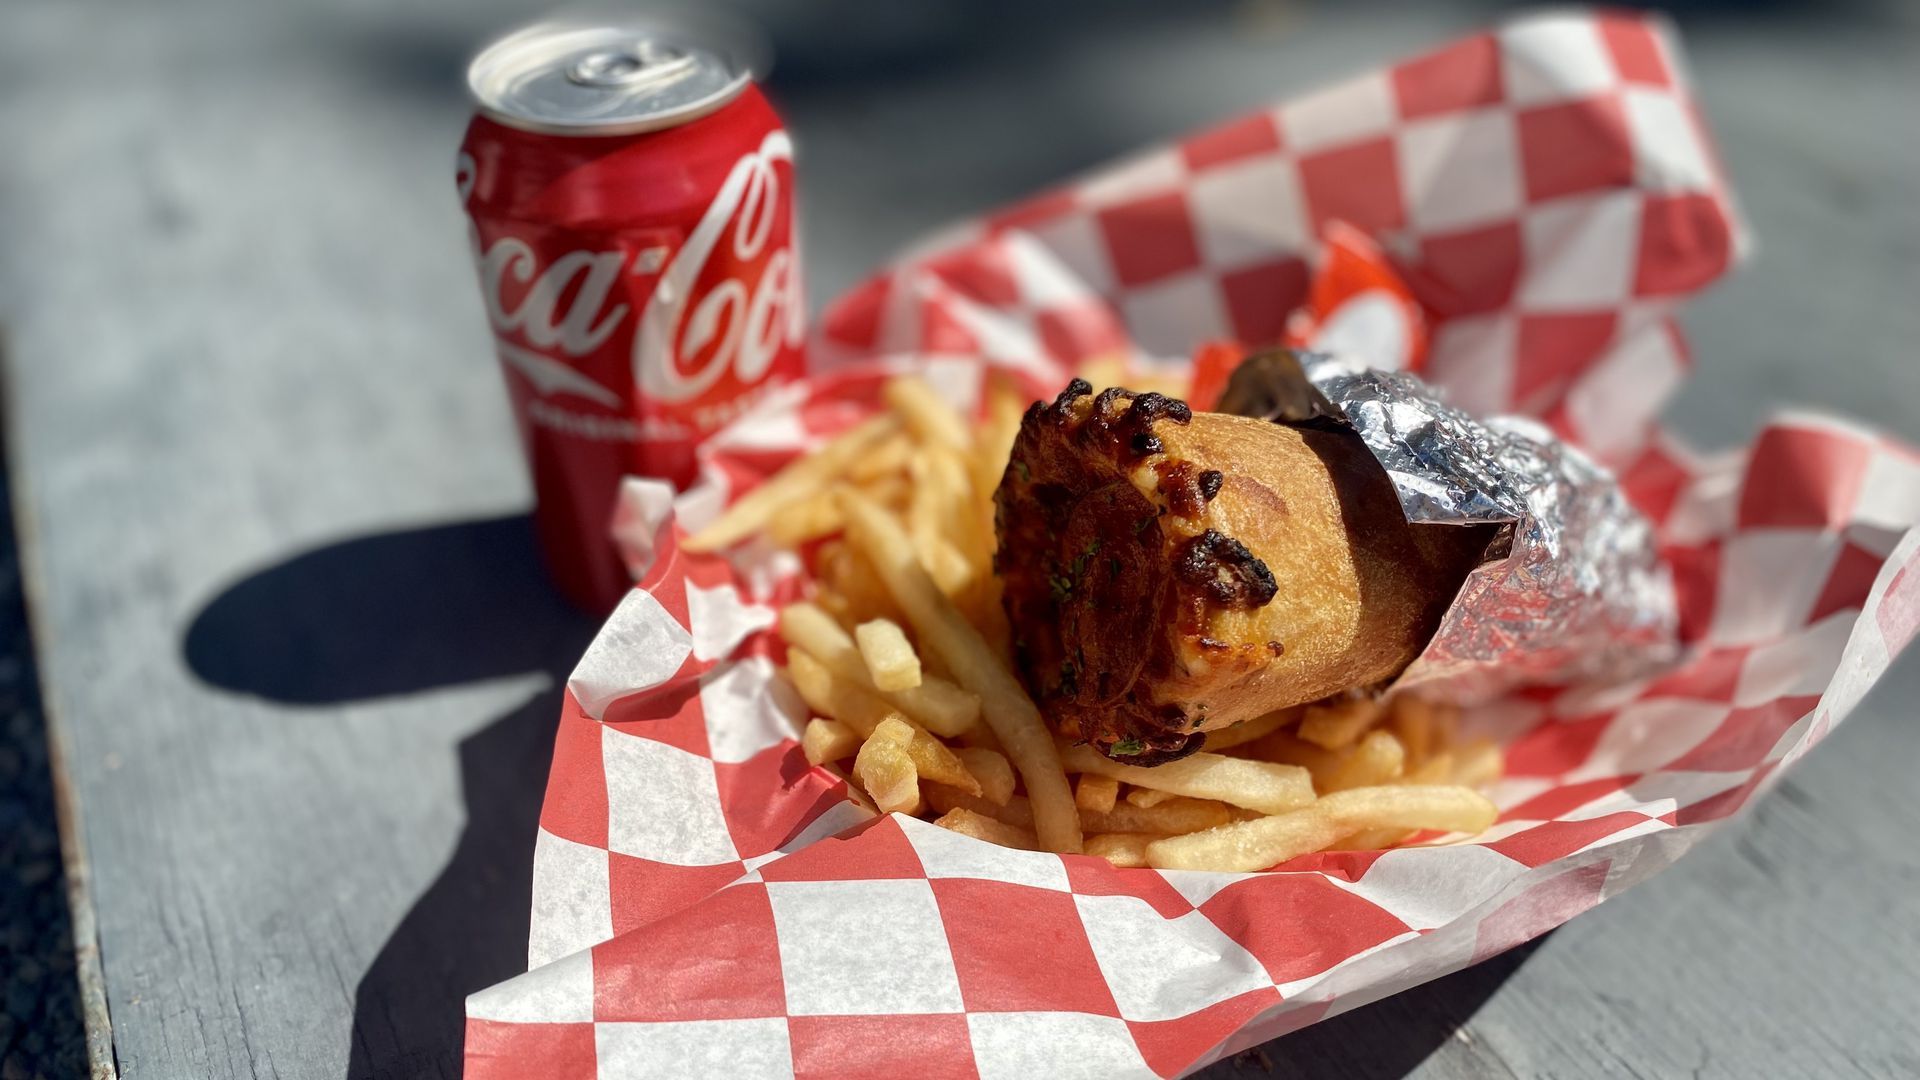 A pizza cone, fries and a Coke